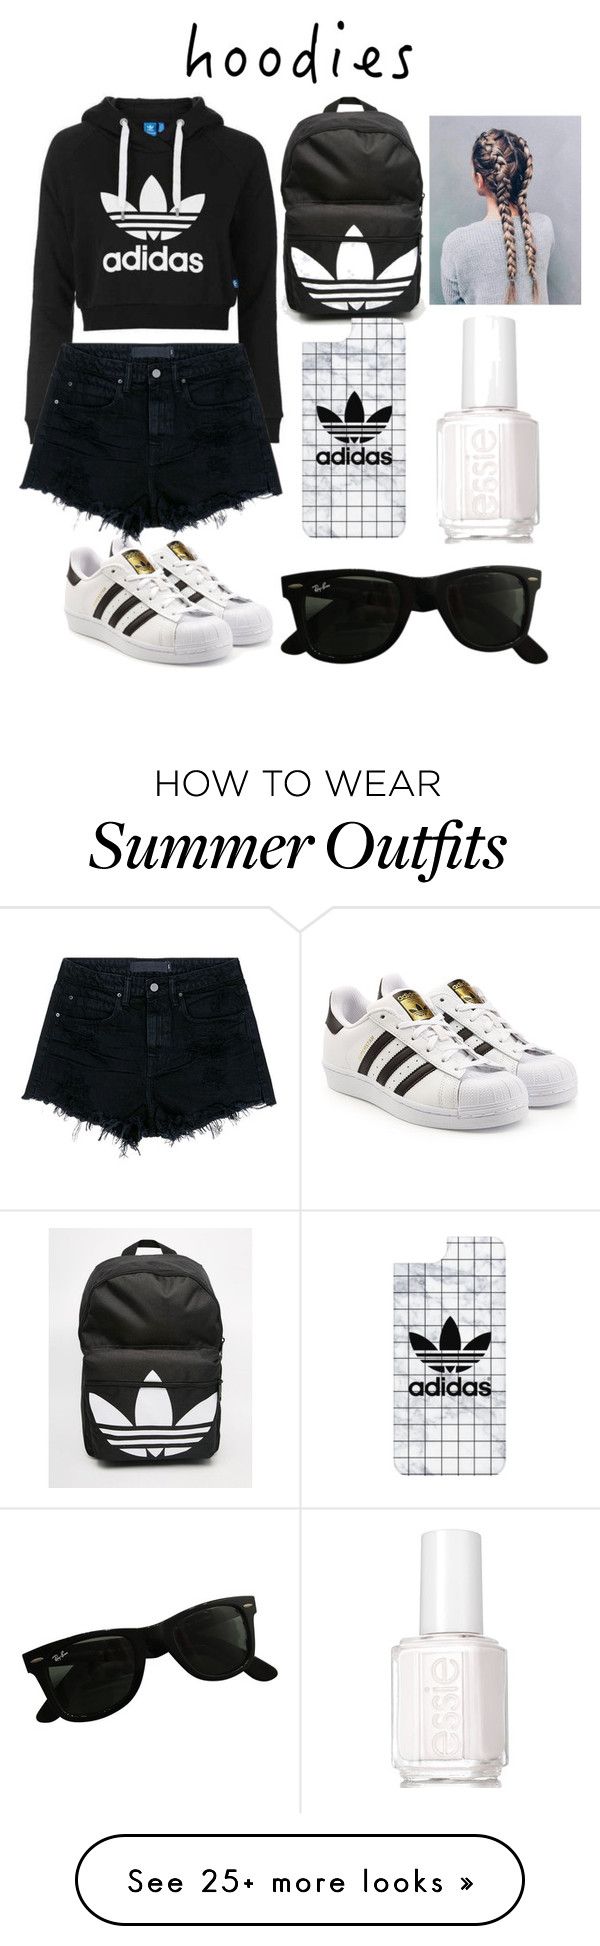 "Adidas (Hoodie) Outfit" by justchleofficial on Polyvore featuring adi...